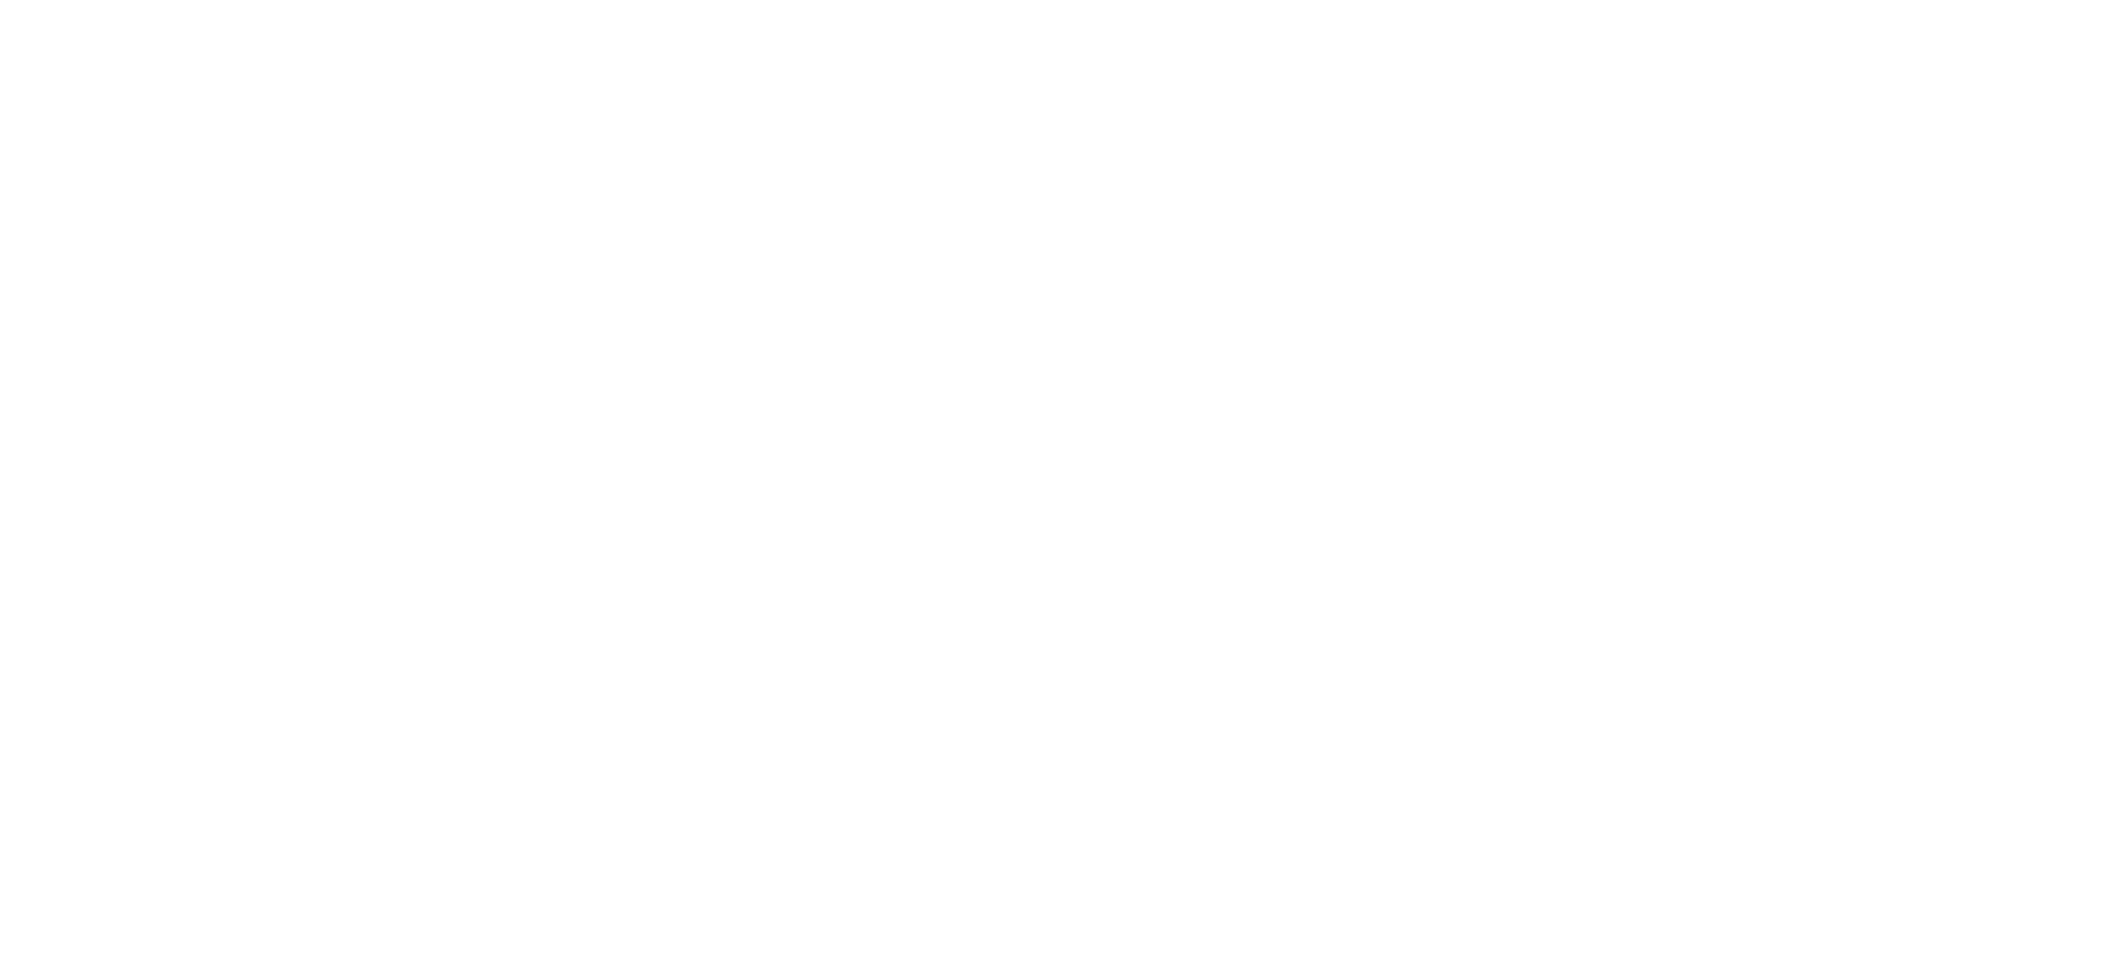 ItWorks Logo - How It Works